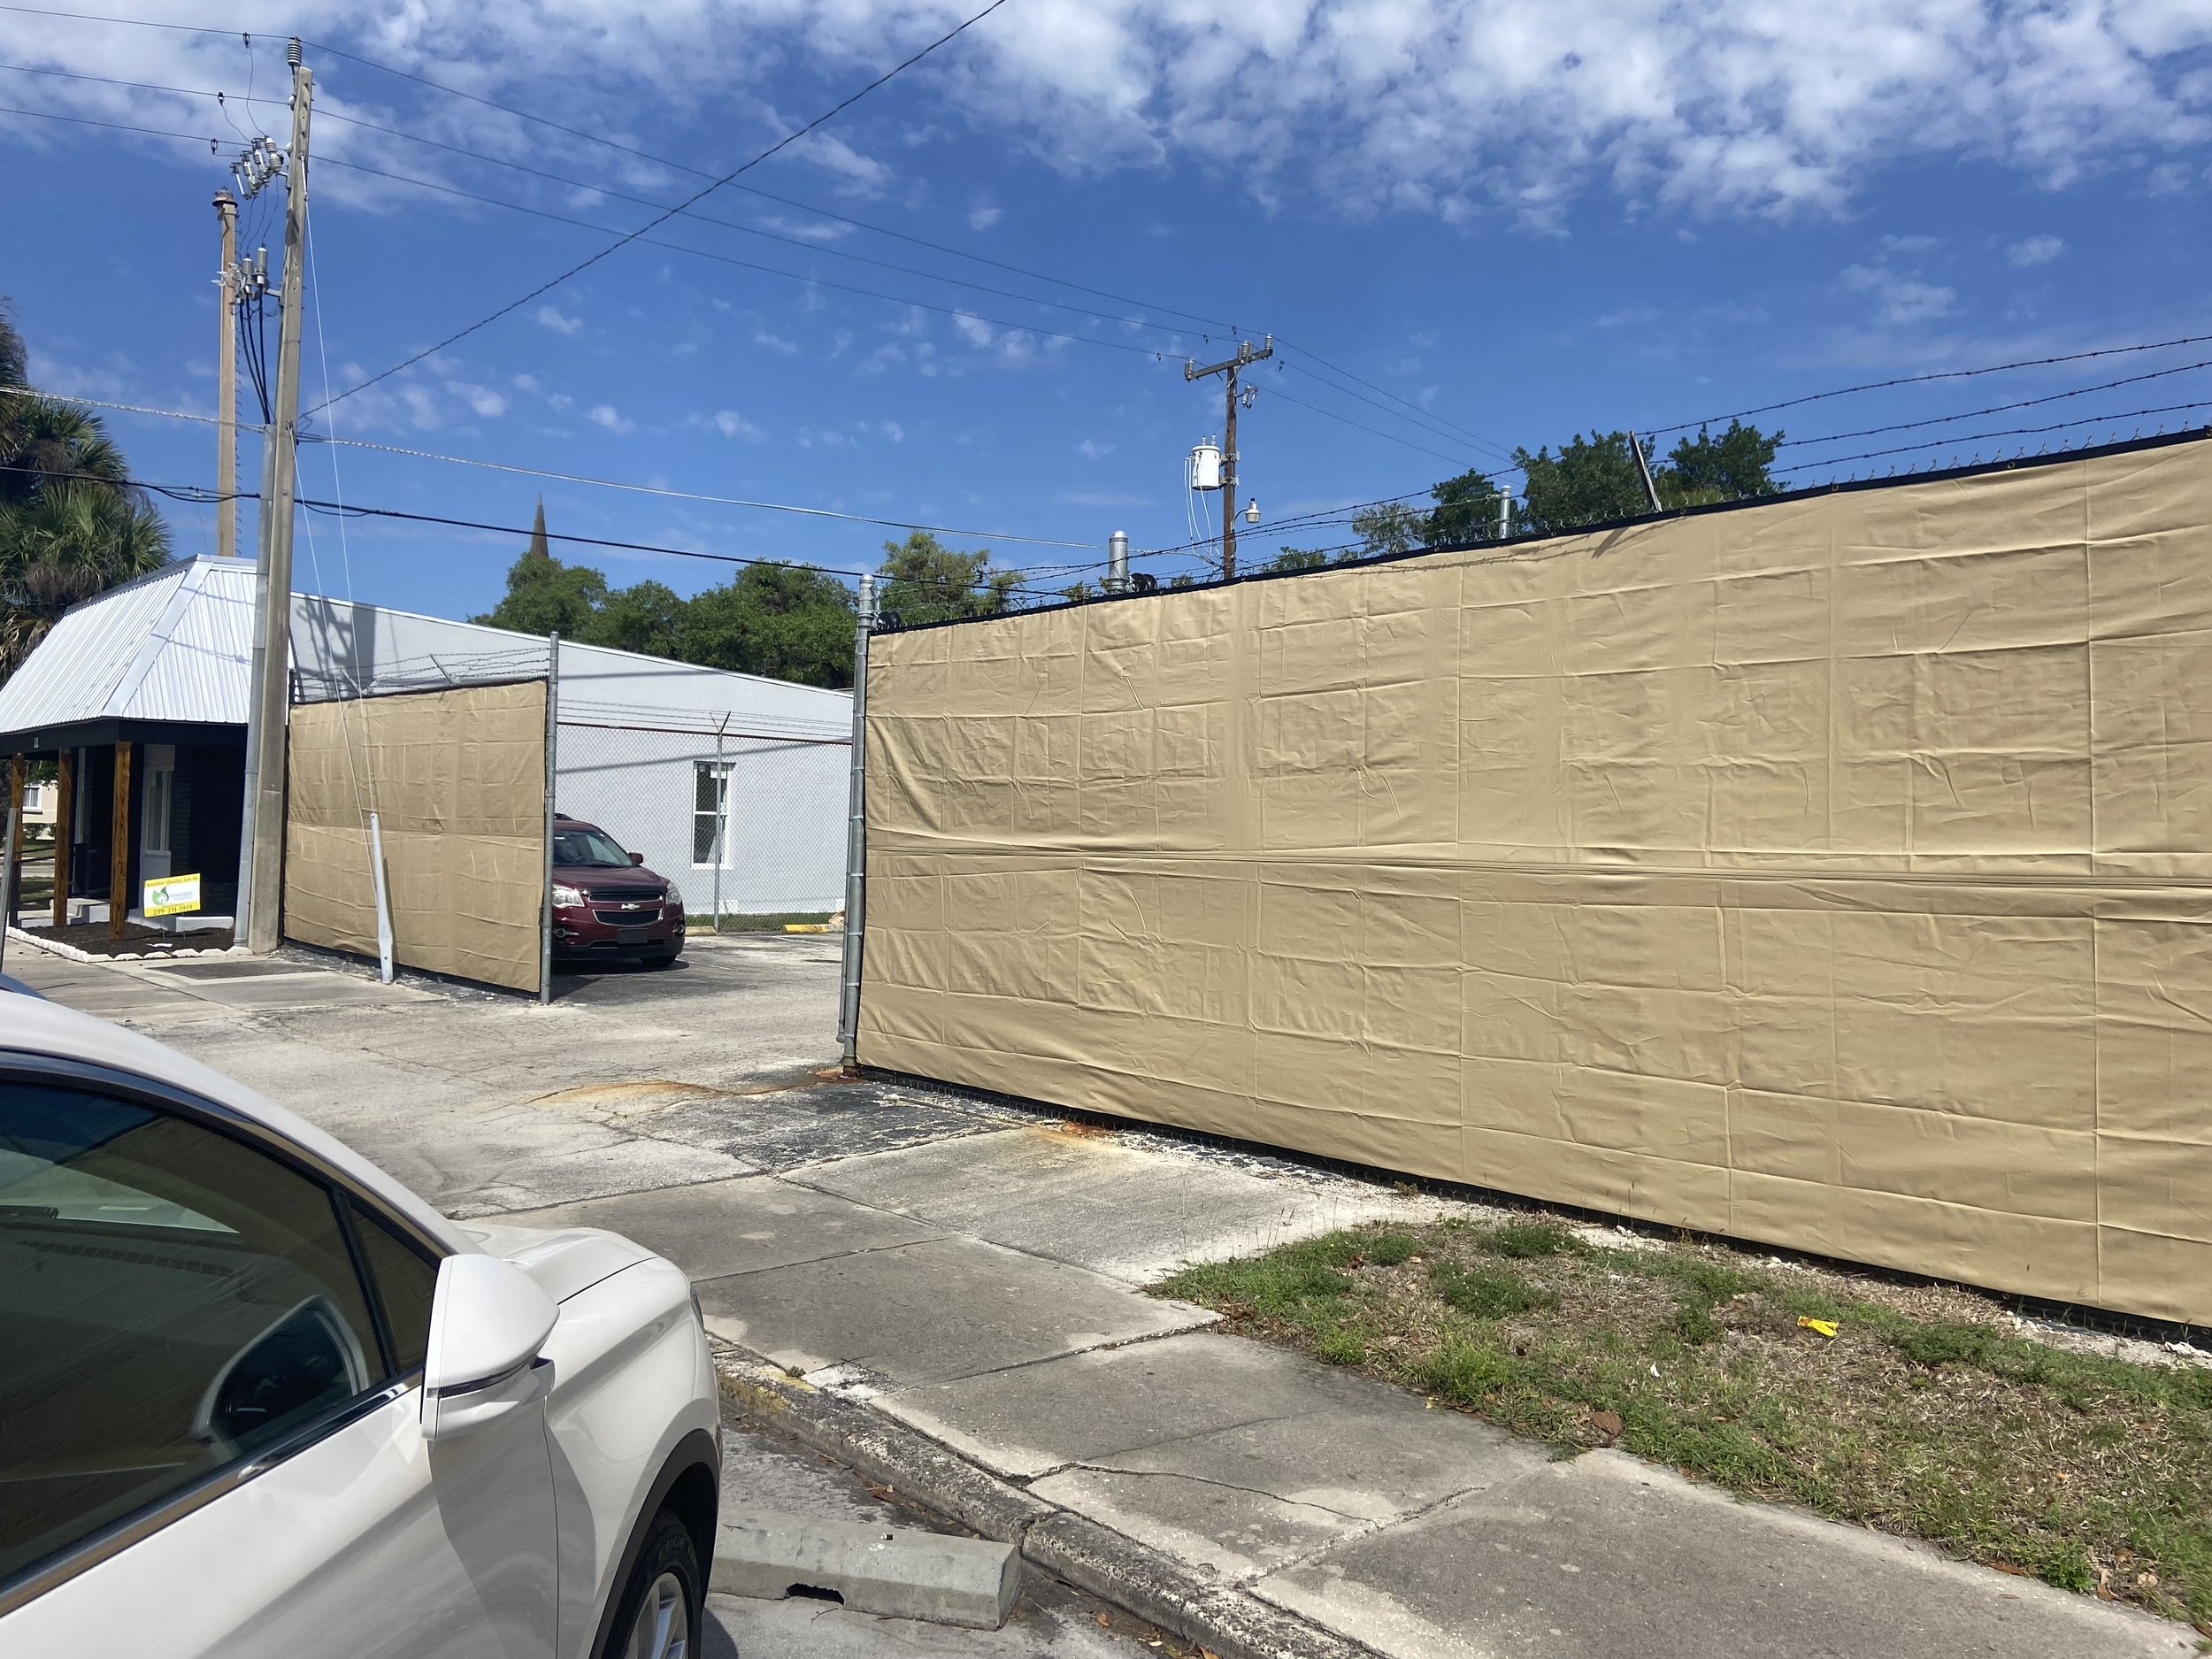 A beige fabric fence in the parking lot of the CenturyLink facility, blocking the industrial view from the street